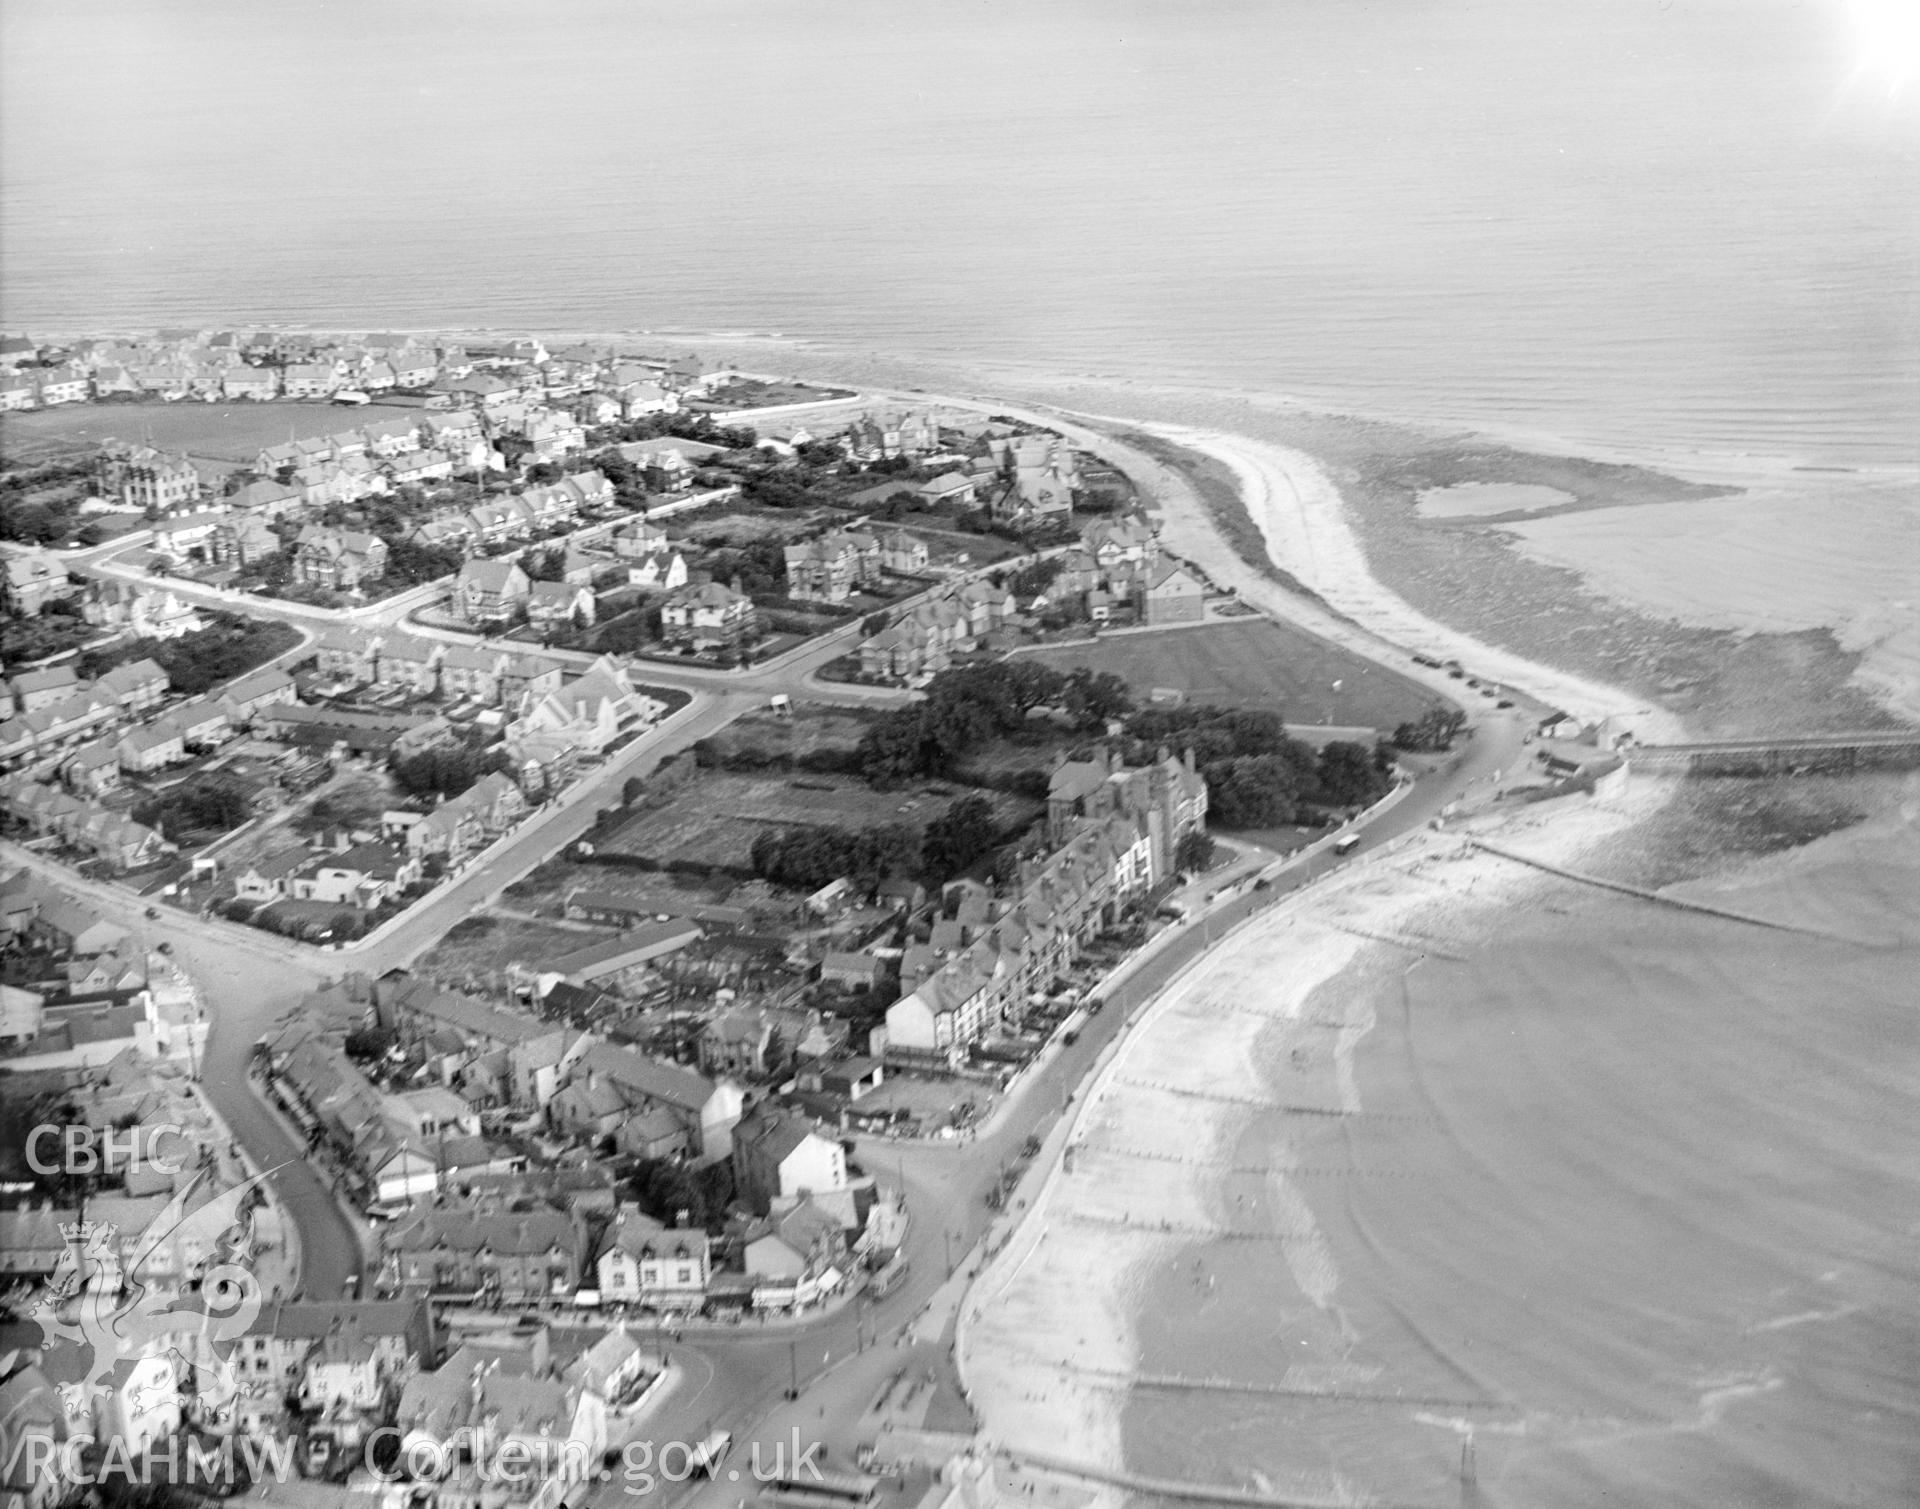 General view of Llandrillo-yn-rhos showing pier, oblique aerial view. 5?x4? black and white glass plate negative.